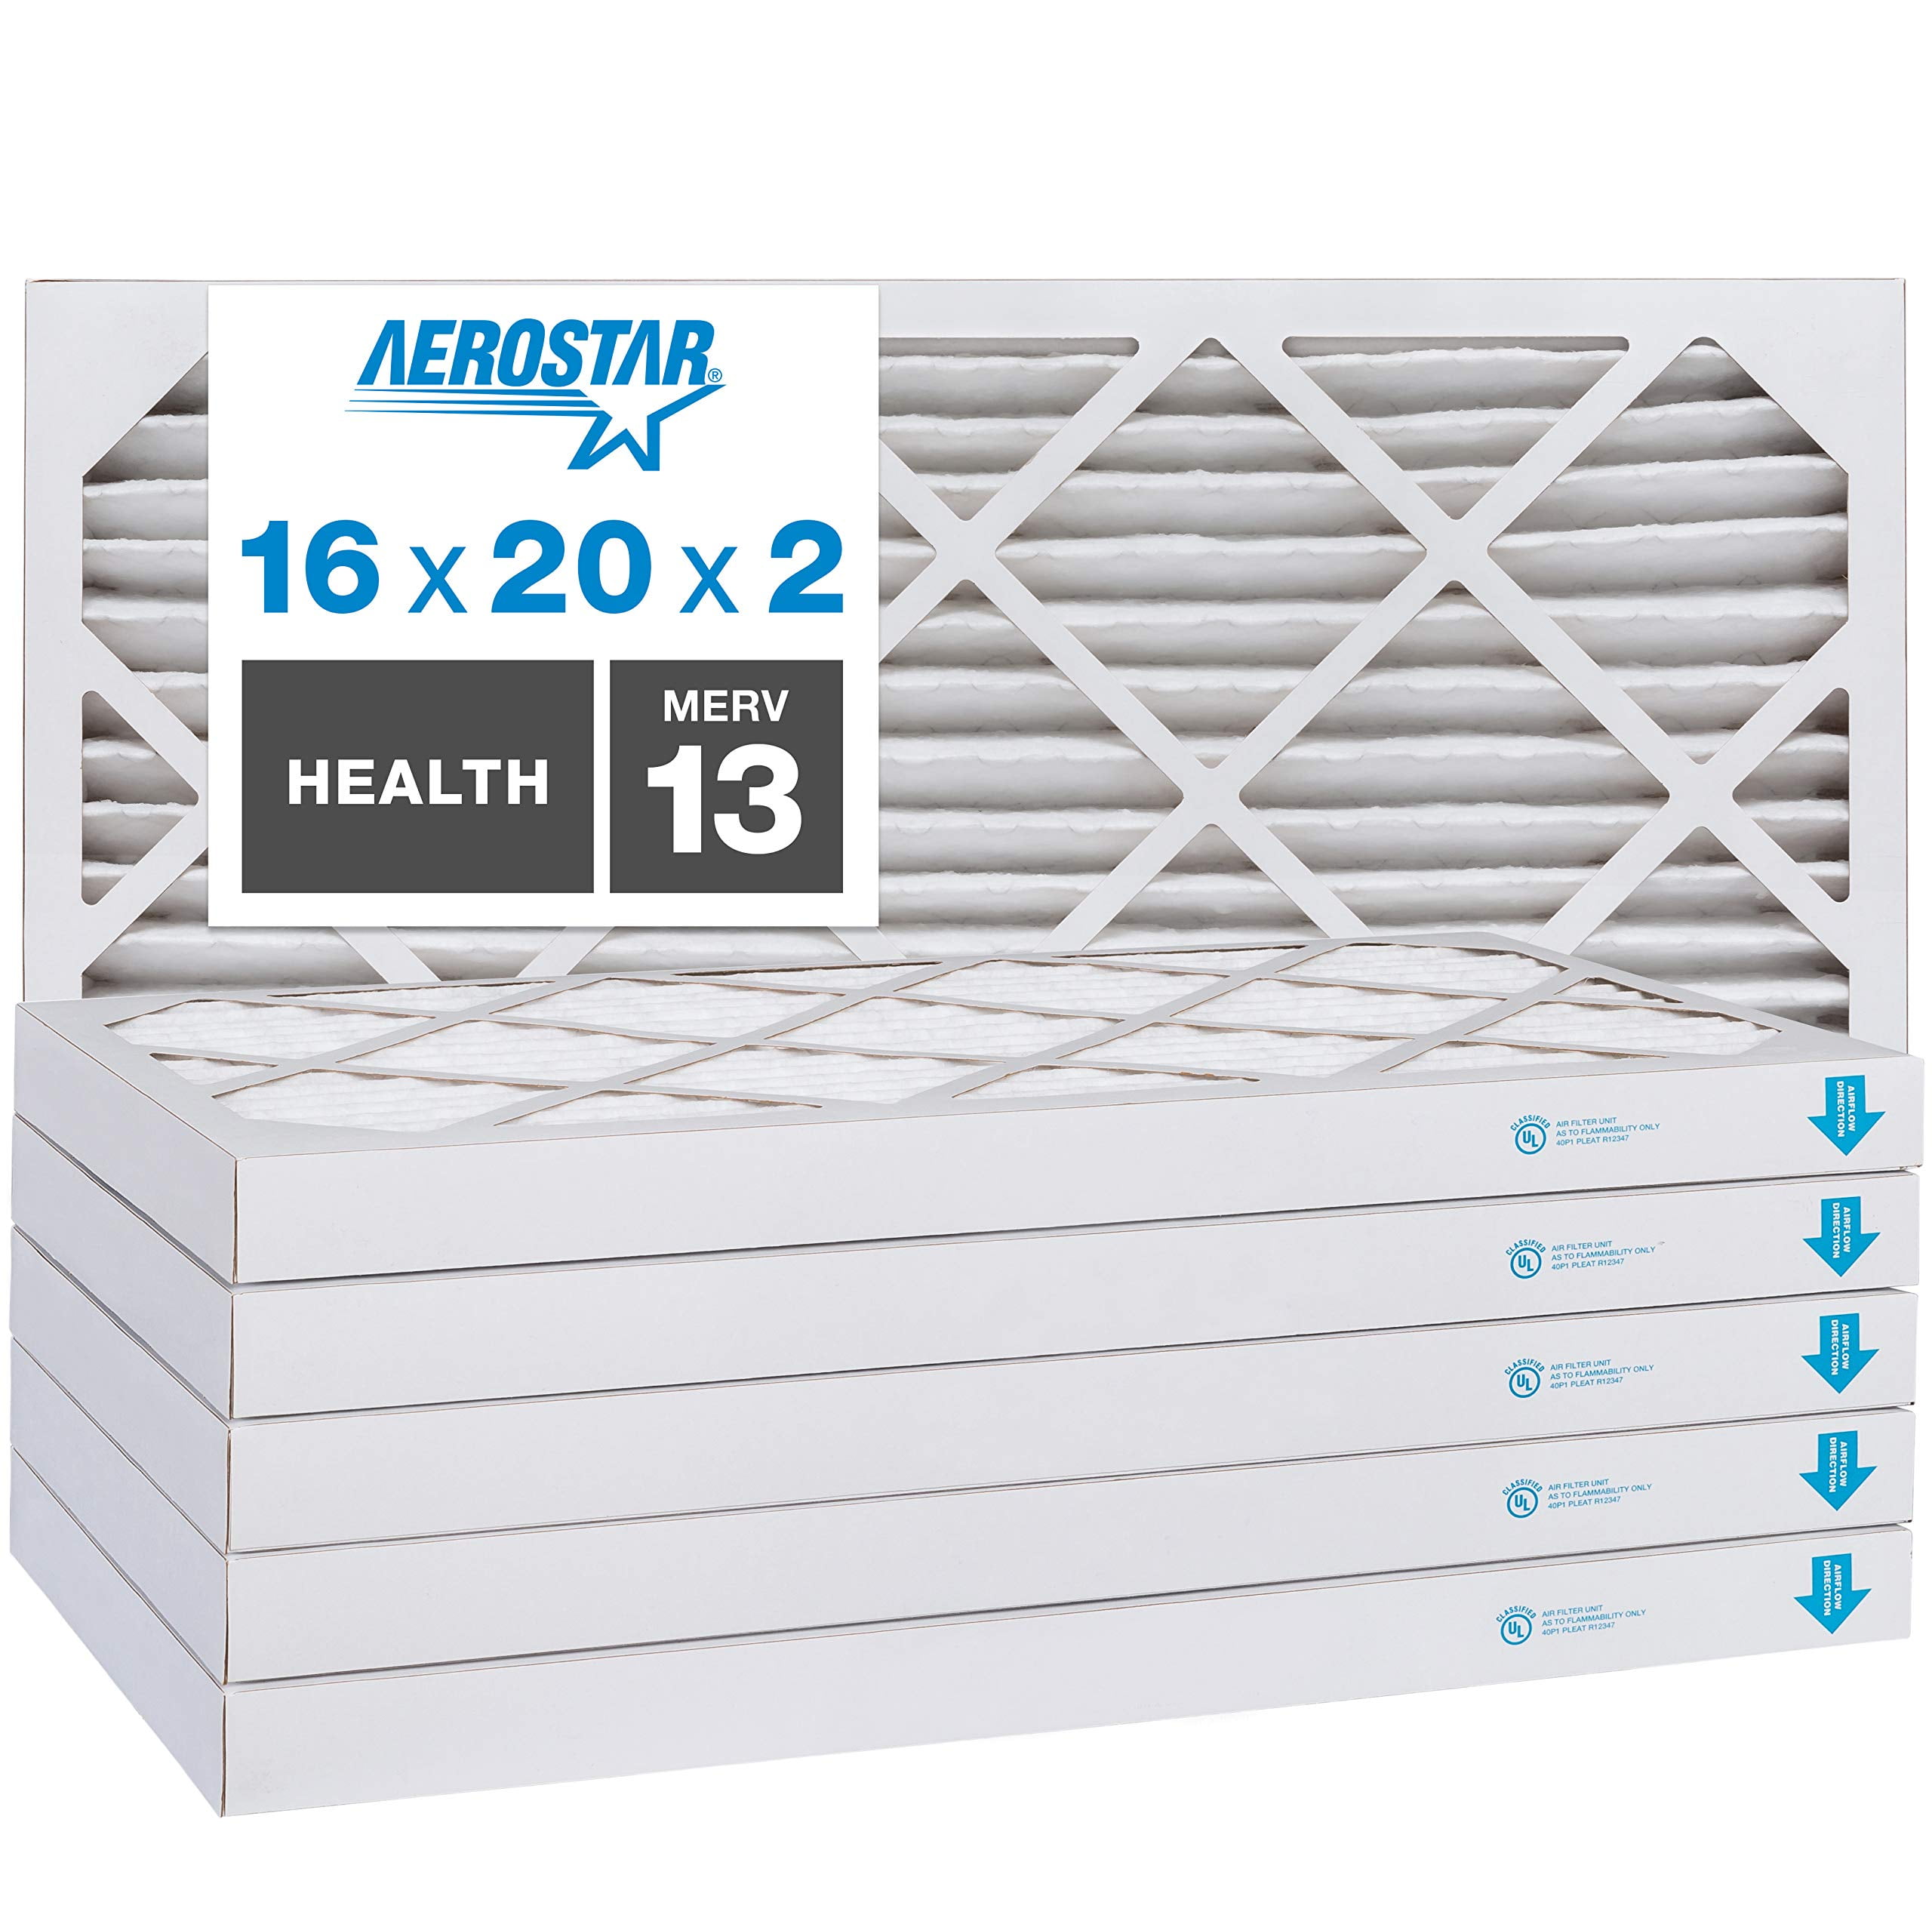 Pack of 6 14x14x1 MERV 13 Aerostar Pleated Air Filter Made in the USA 